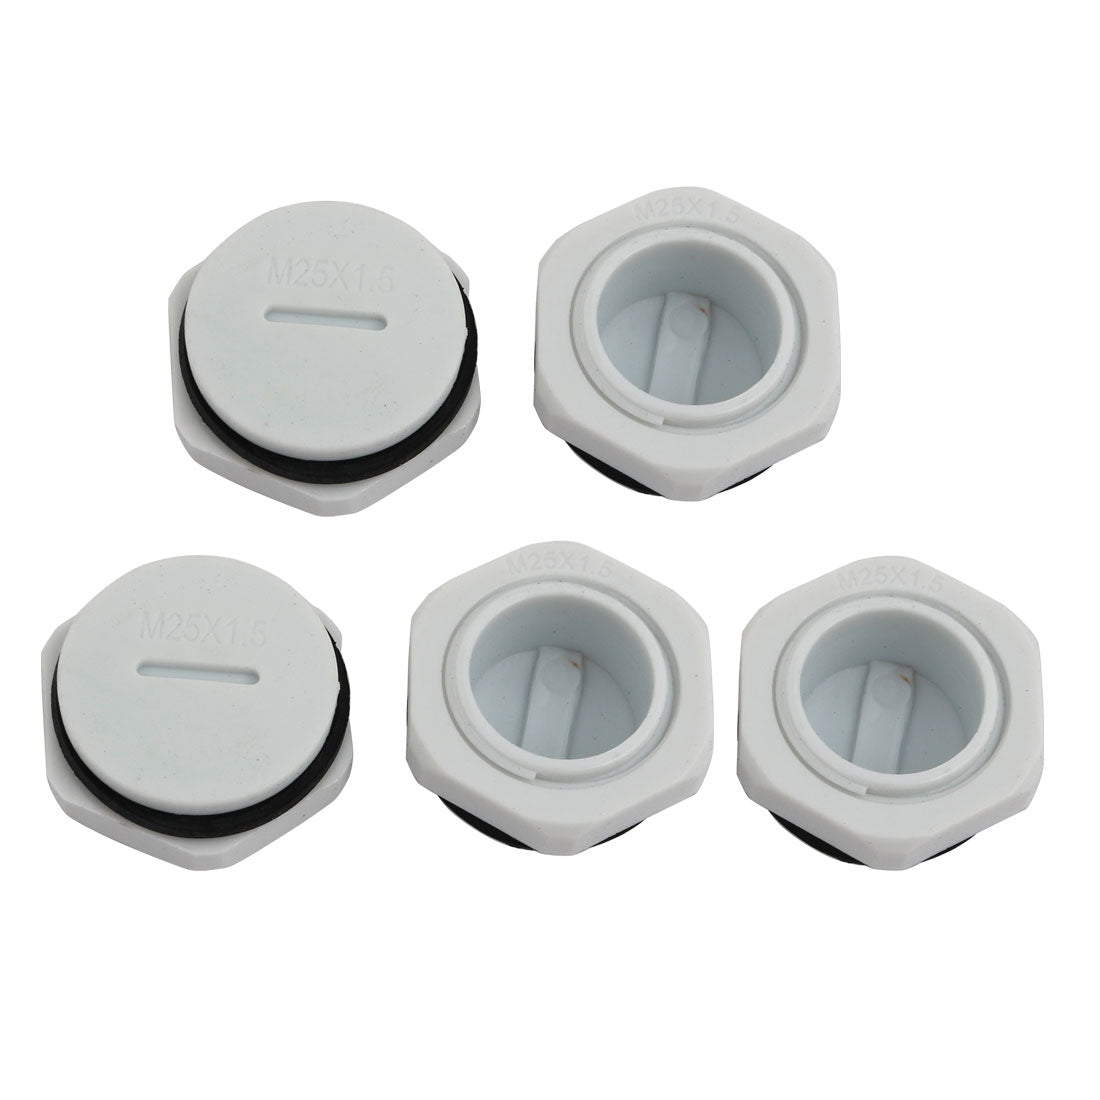 uxcell Uxcell 5pcs GLW-M25 Nylon Threaded Cable Gland Cap Round Screw-in Cover Gray w Washer